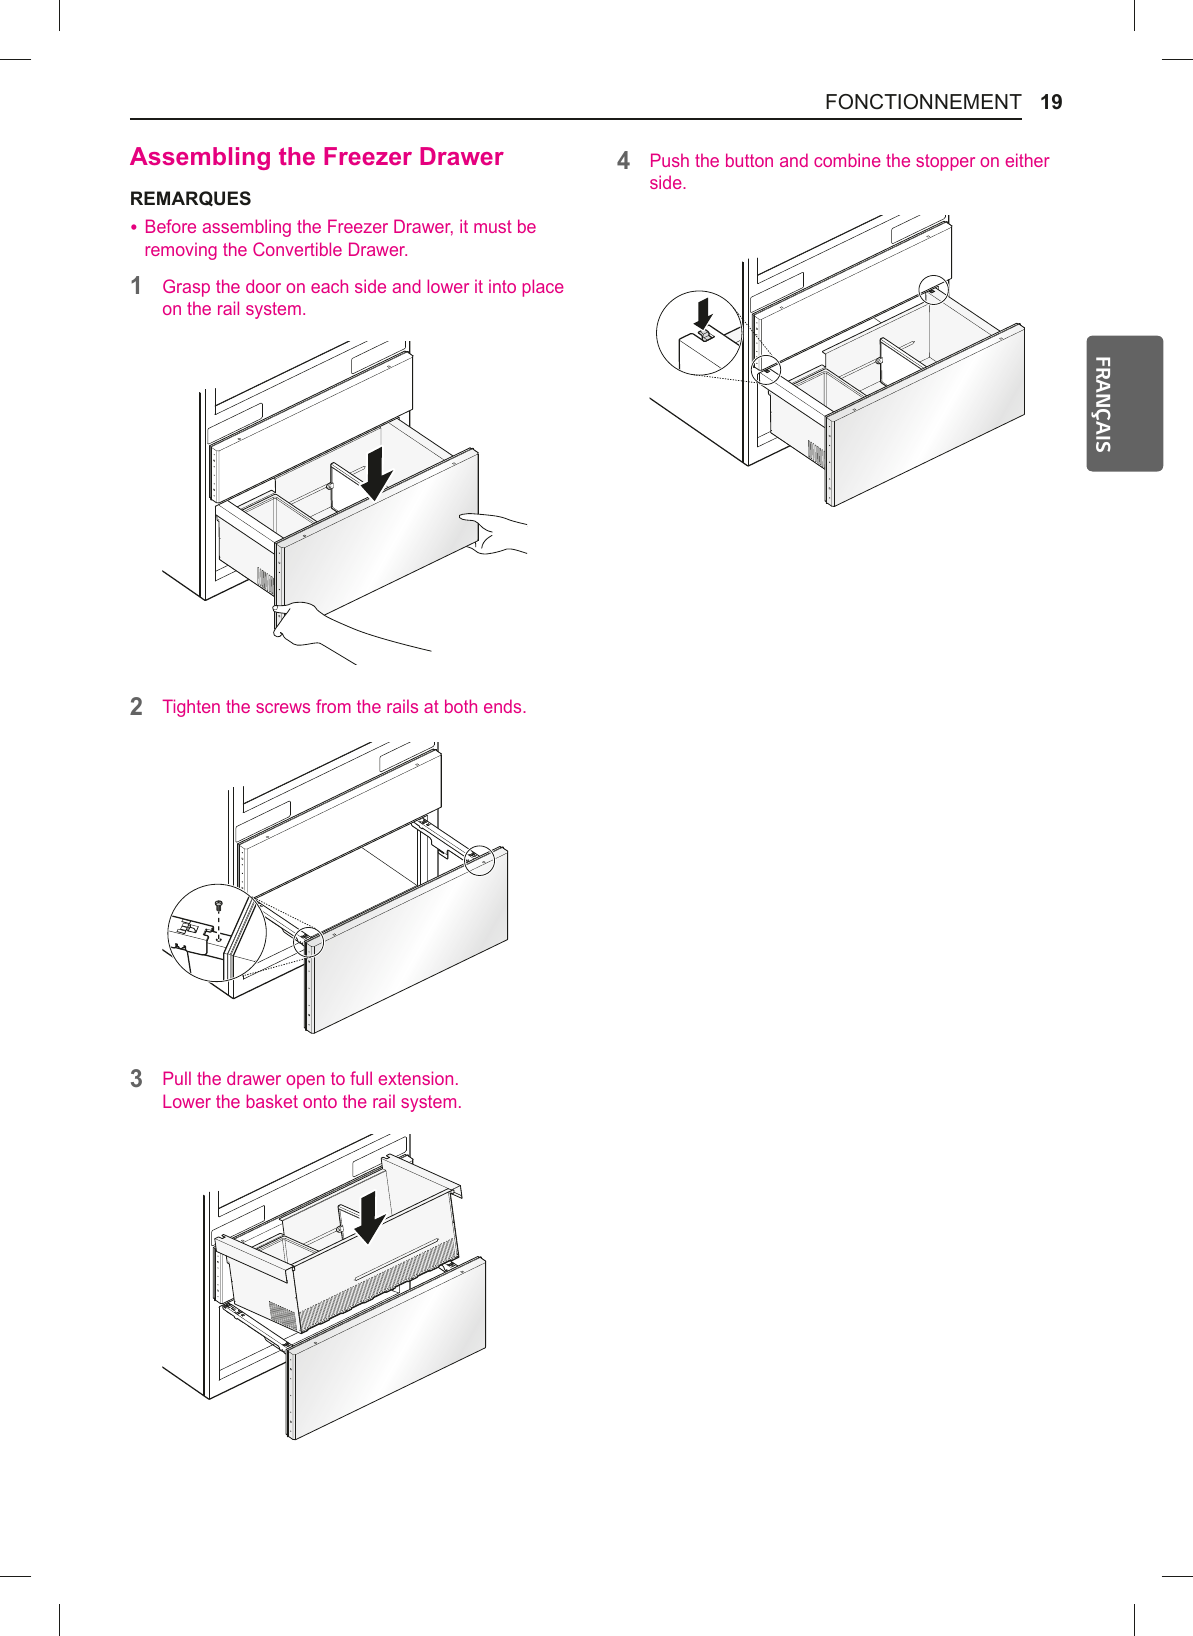 19FONCTIONNEMENTFRANÇAIS$VVHPEOLQJWKH)UHH]HU&apos;UDZHUREMARQUES %Before assembling the Freezer Drawer, it must be removing the Convertible Drawer. 1Grasp the door on each side and lower it into place on the rail system.2Tighten the screws from the rails at both ends. 3Pull the drawer open to full extension. Lower the basket onto the rail system.4Push the button and combine the stopper on either side.